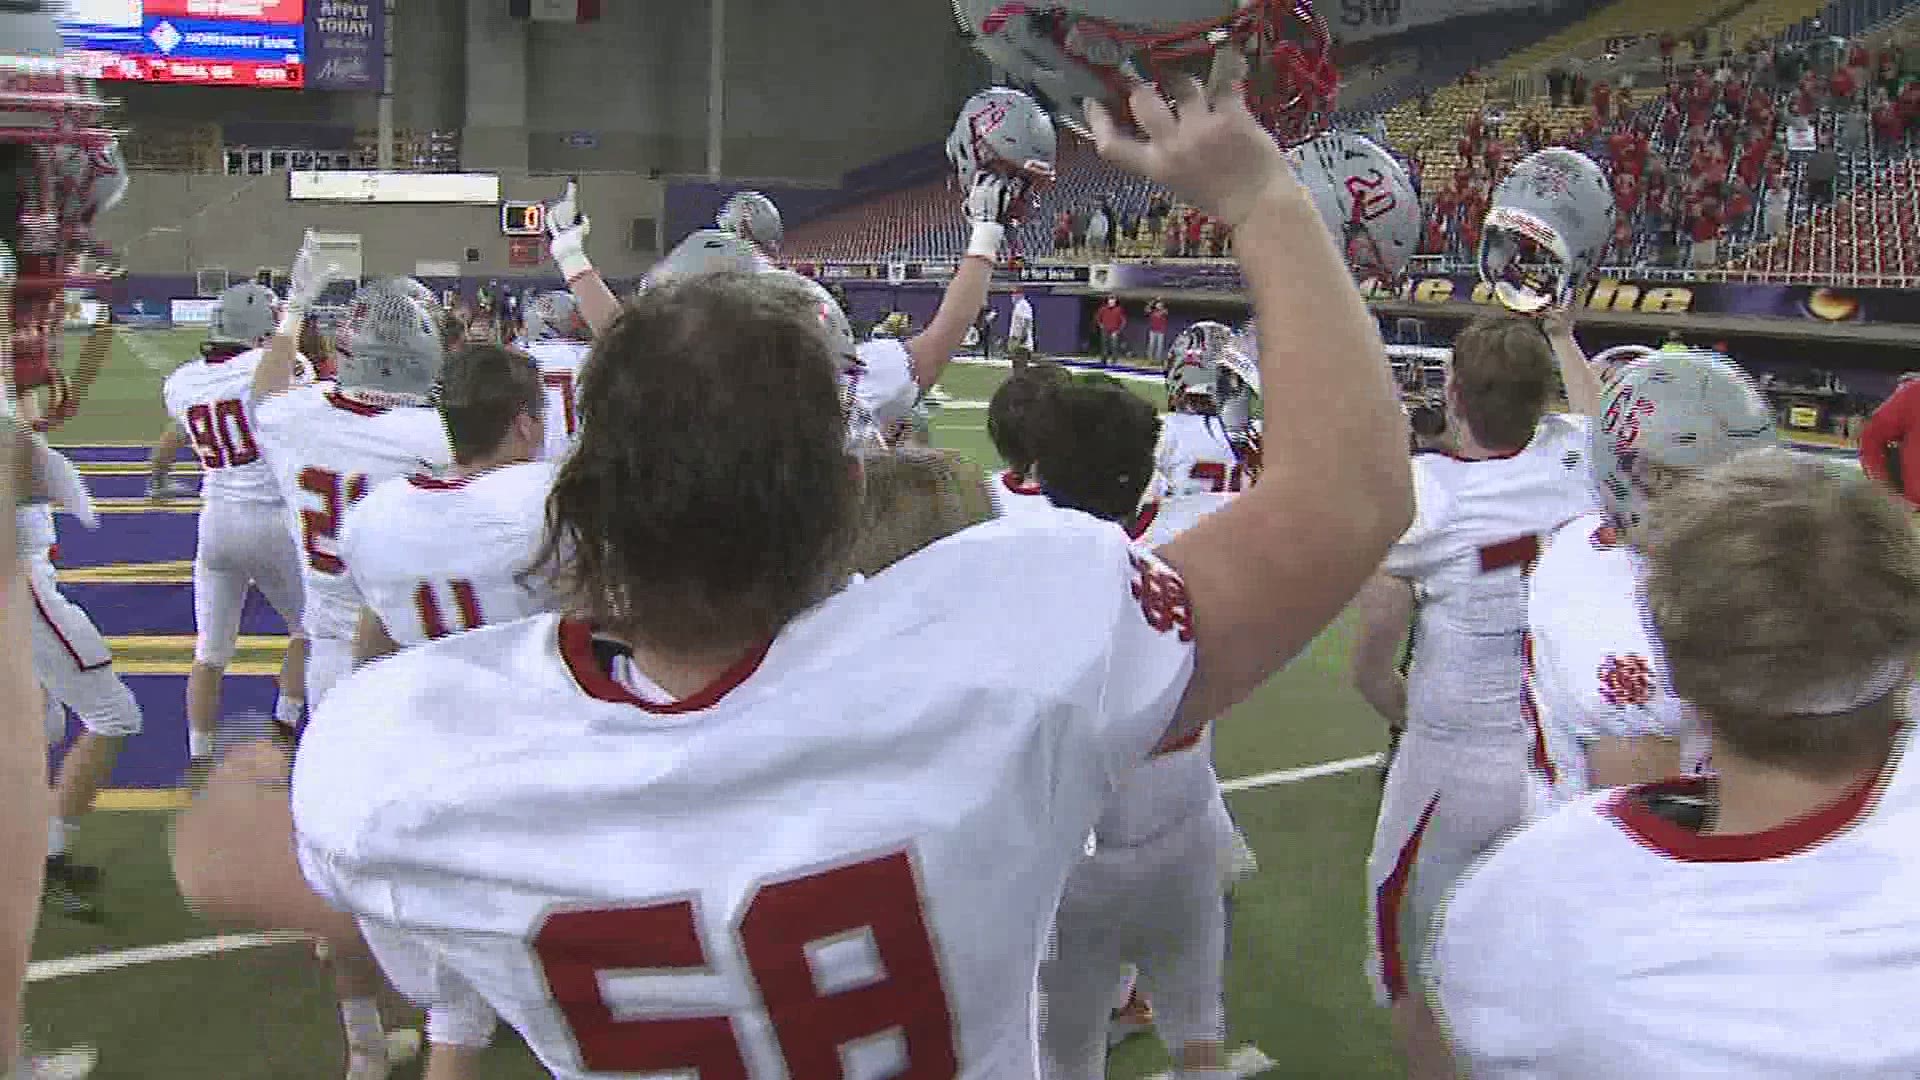 It was the first time the Lancers took the field at a state-title game and their first state title win.